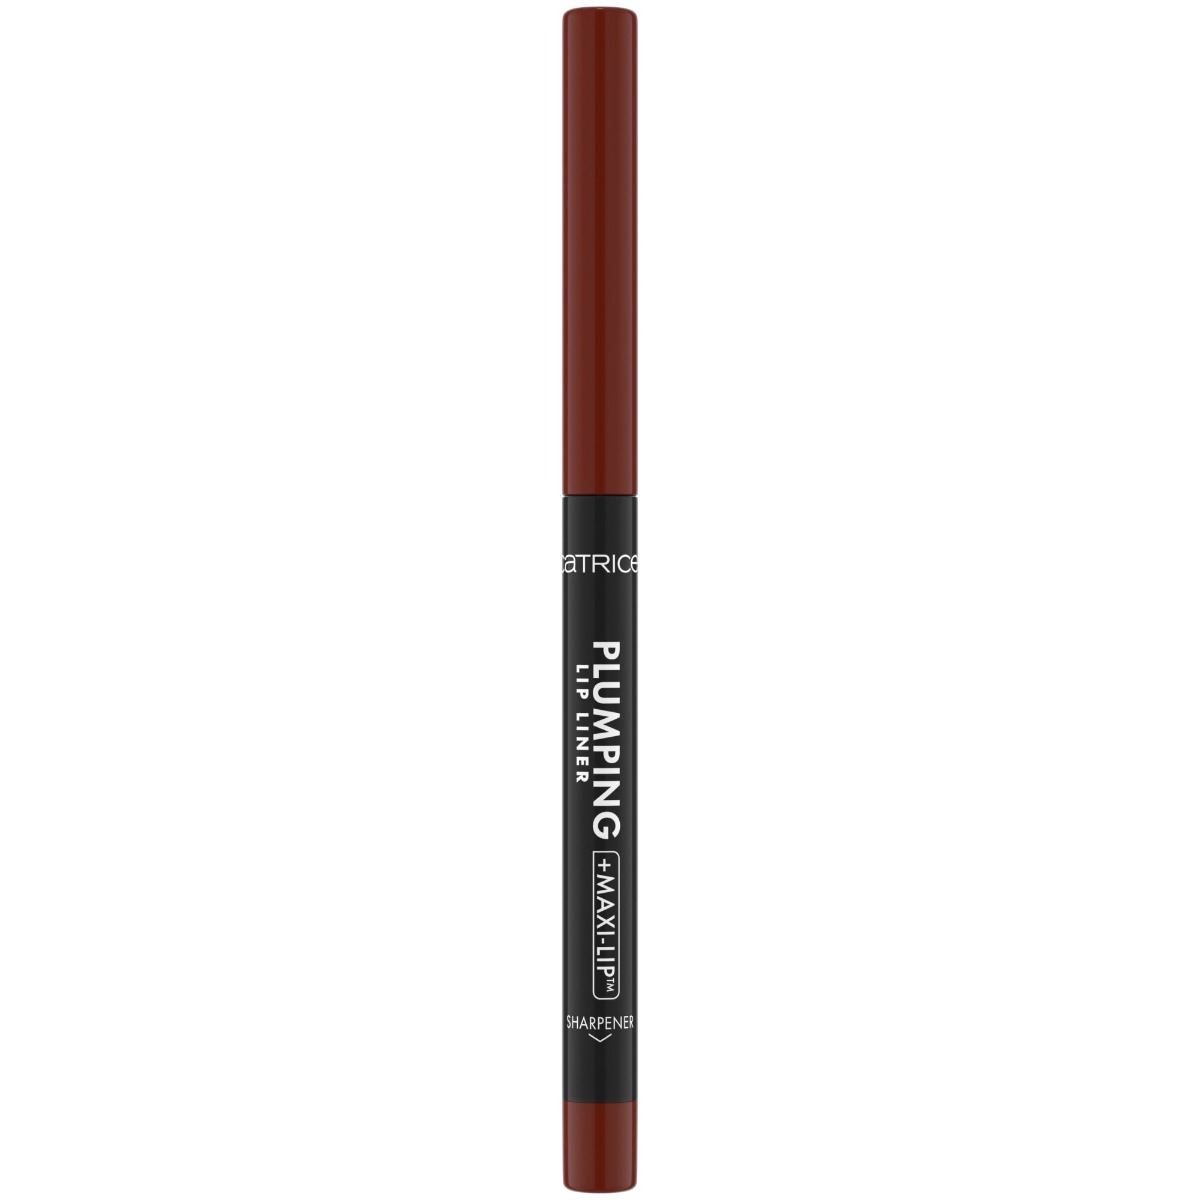 Creion pentru buze Plumping Lip Liner 100 - Go All-Out, 0.35g, Catrice